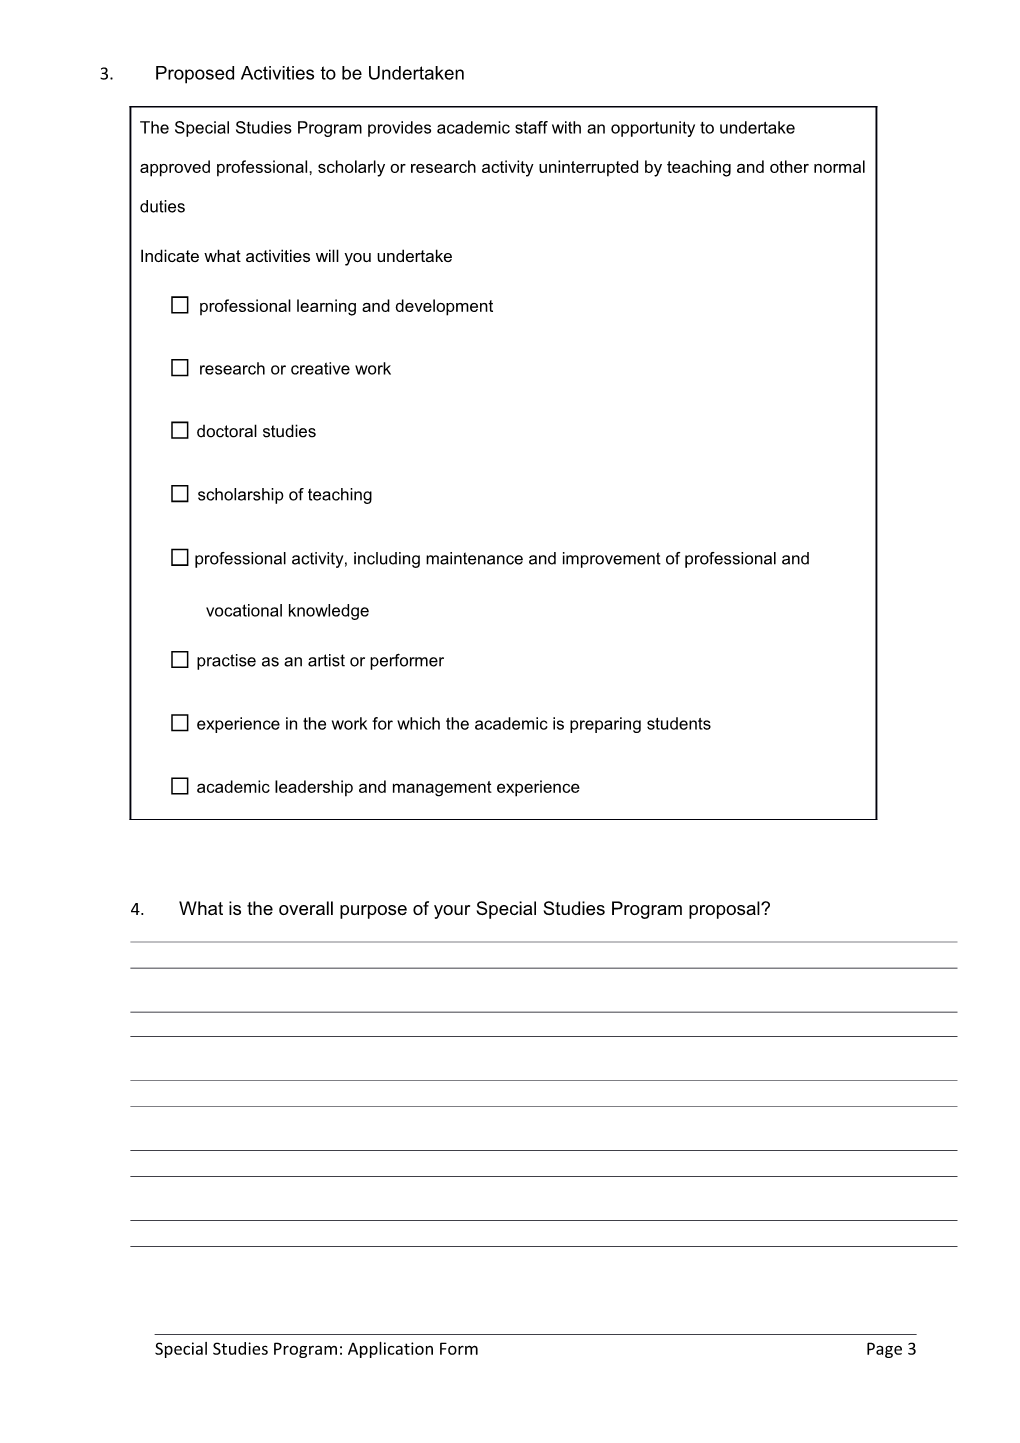 Instructions for Completing This Form